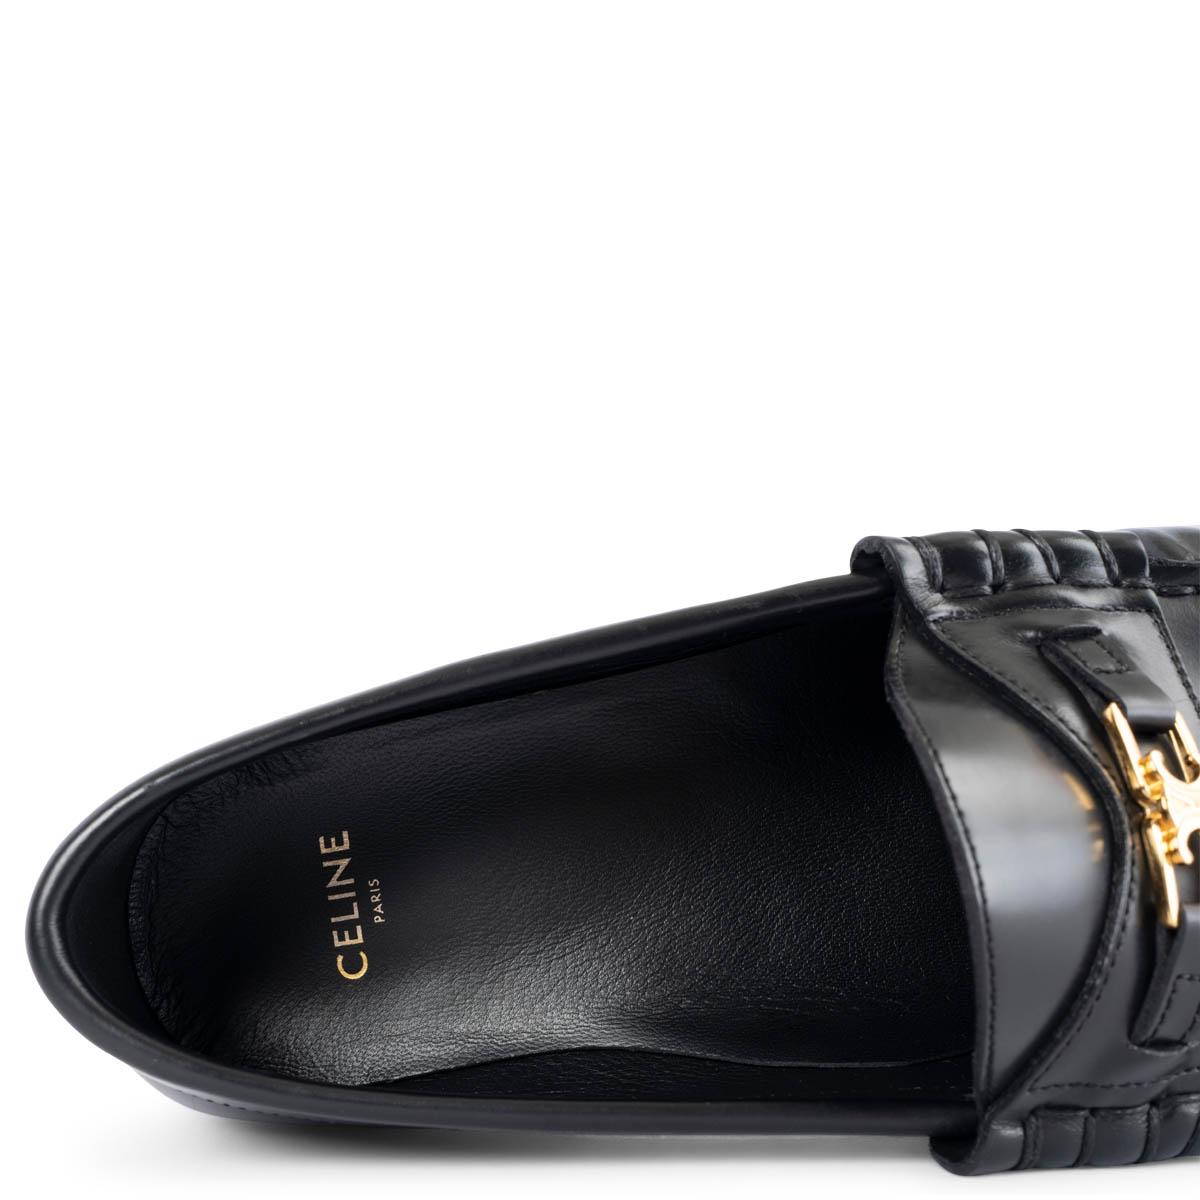 CELINE black leather LUCO TRIOMPHE Loafers Shoes 38.5 4